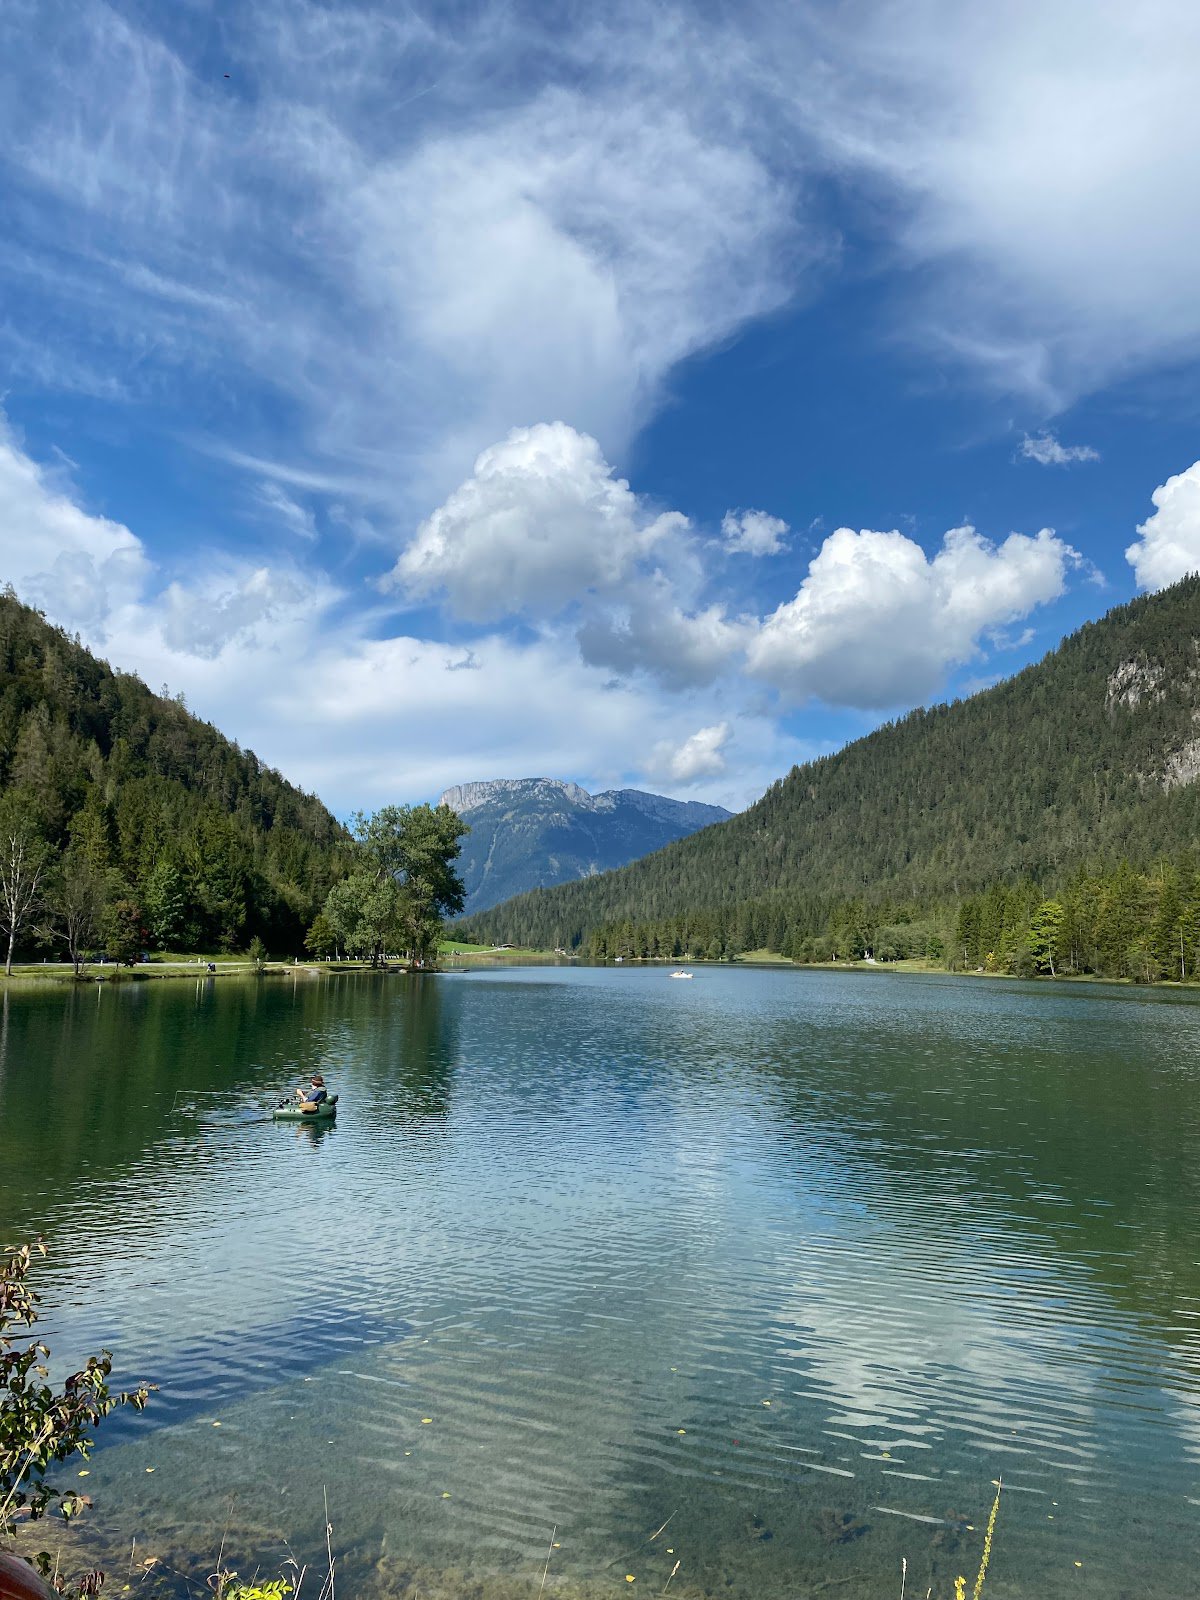 A picture of Pillersee